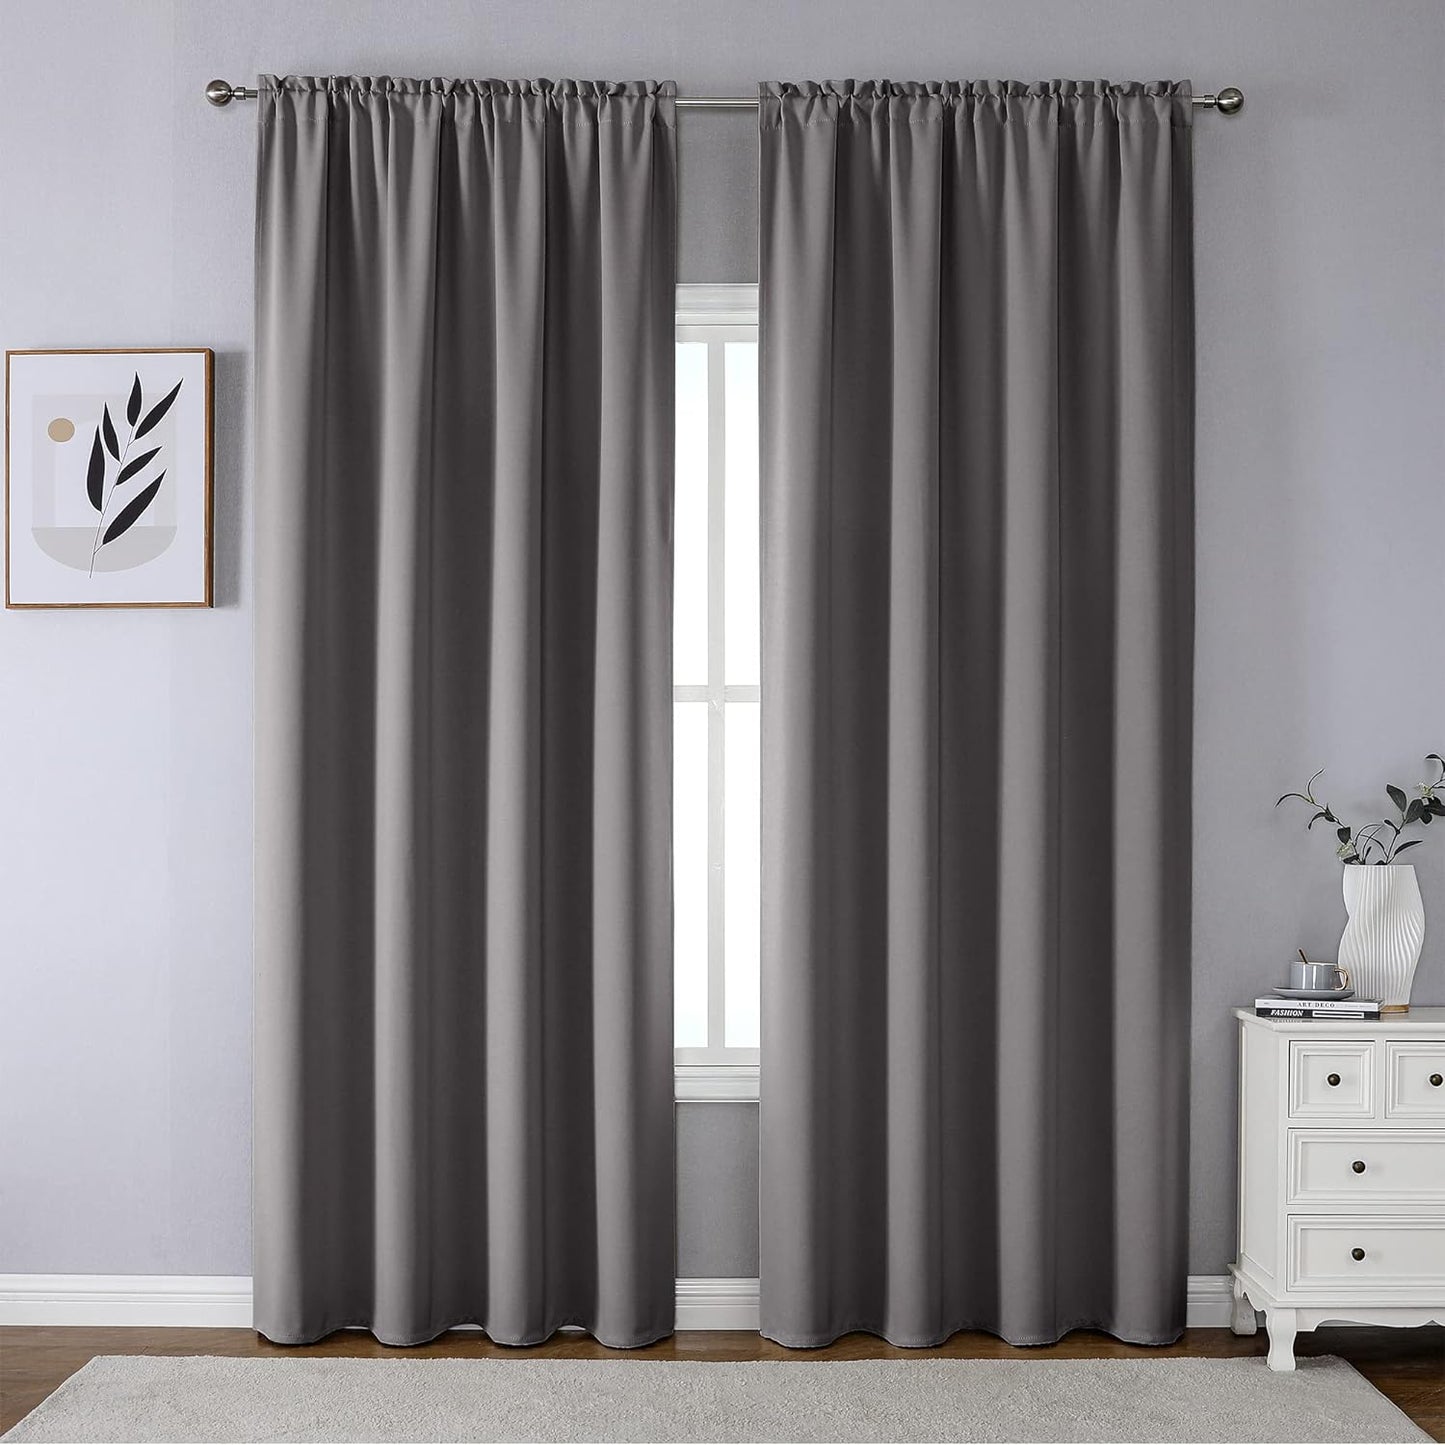 CUCRAF Blackout Curtains 84 Inches Long for Living Room, Light Beige Room Darkening Window Curtain Panels, Rod Pocket Thermal Insulated Solid Drapes for Bedroom, 52X84 Inch, Set of 2 Panels  CUCRAF Light Grey 52W X 95L Inch 2 Panels 